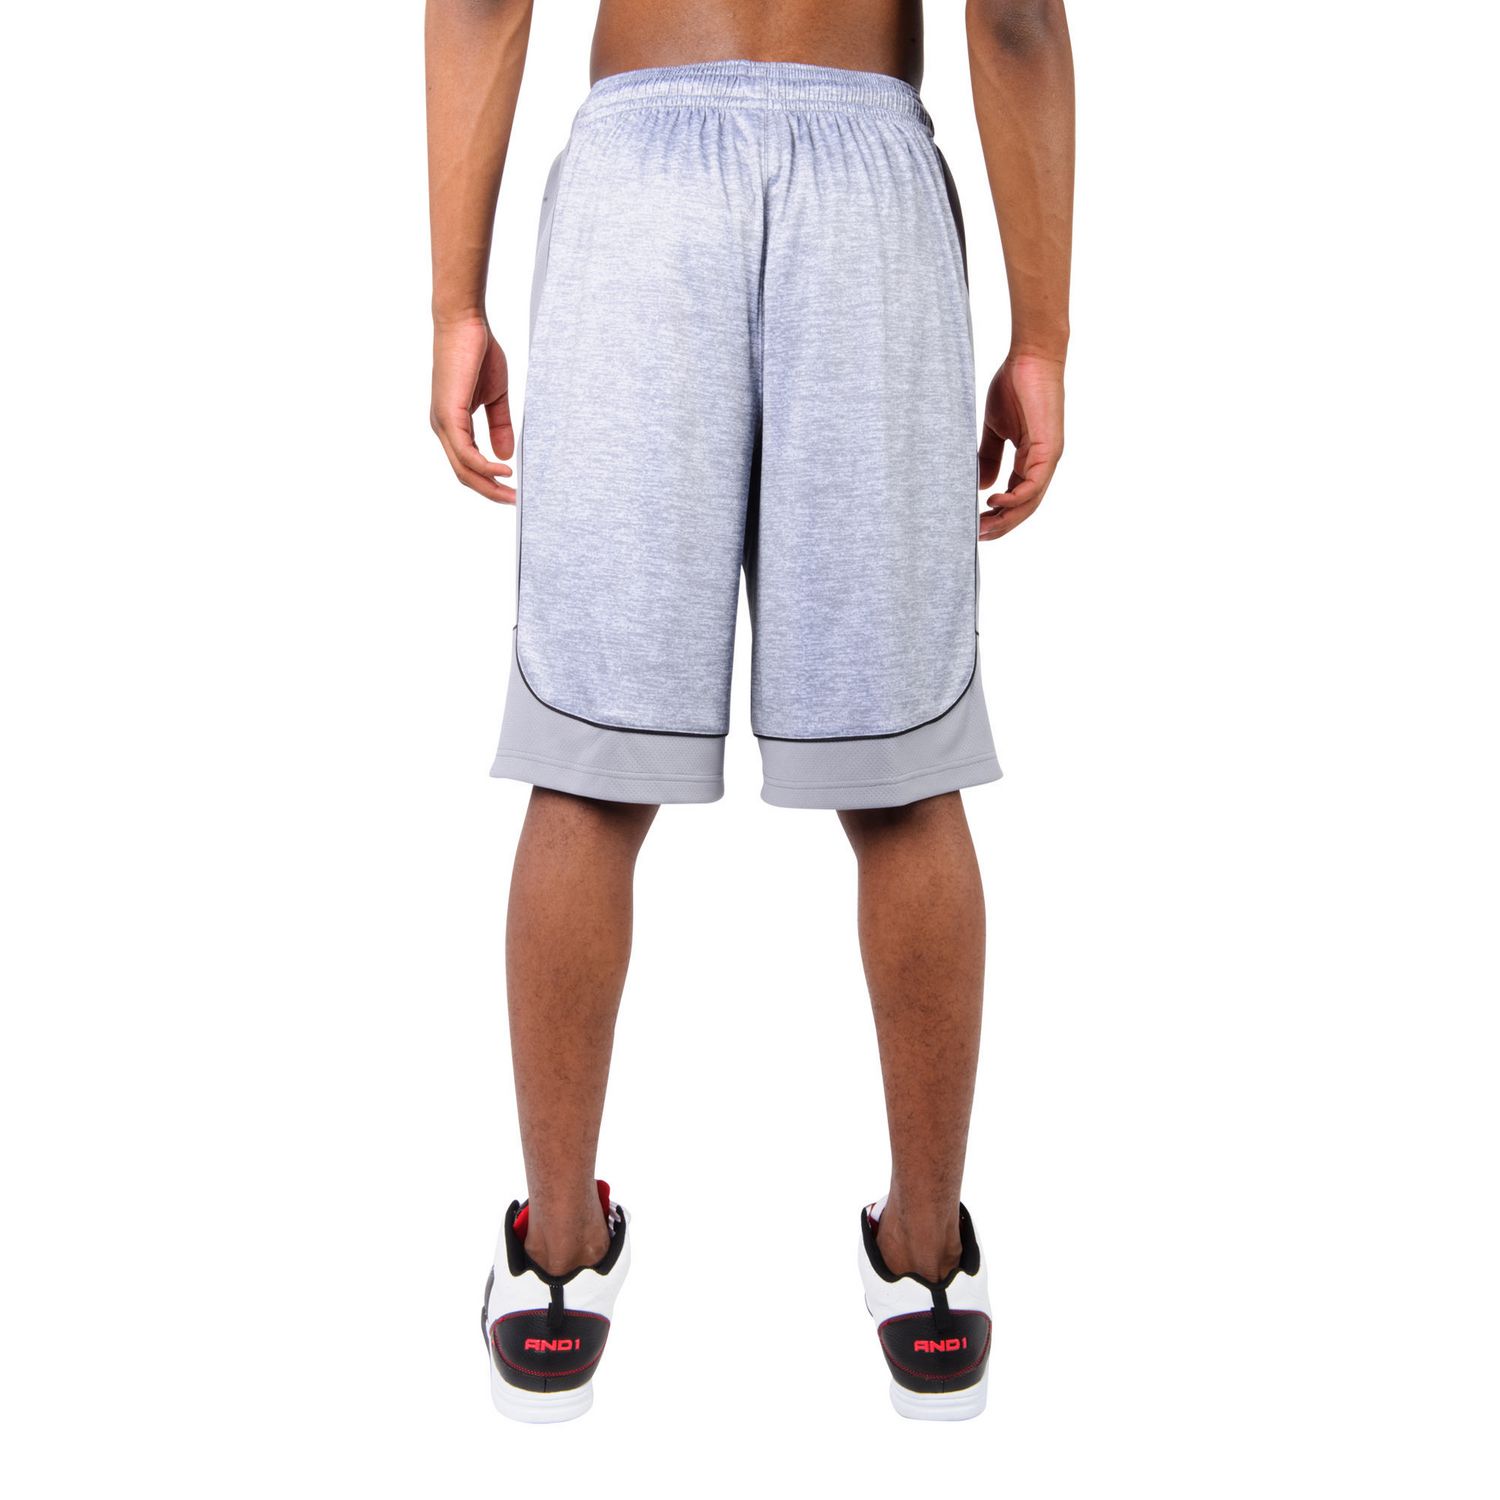 AND1 Men's All Court Shorts | Walmart Canada